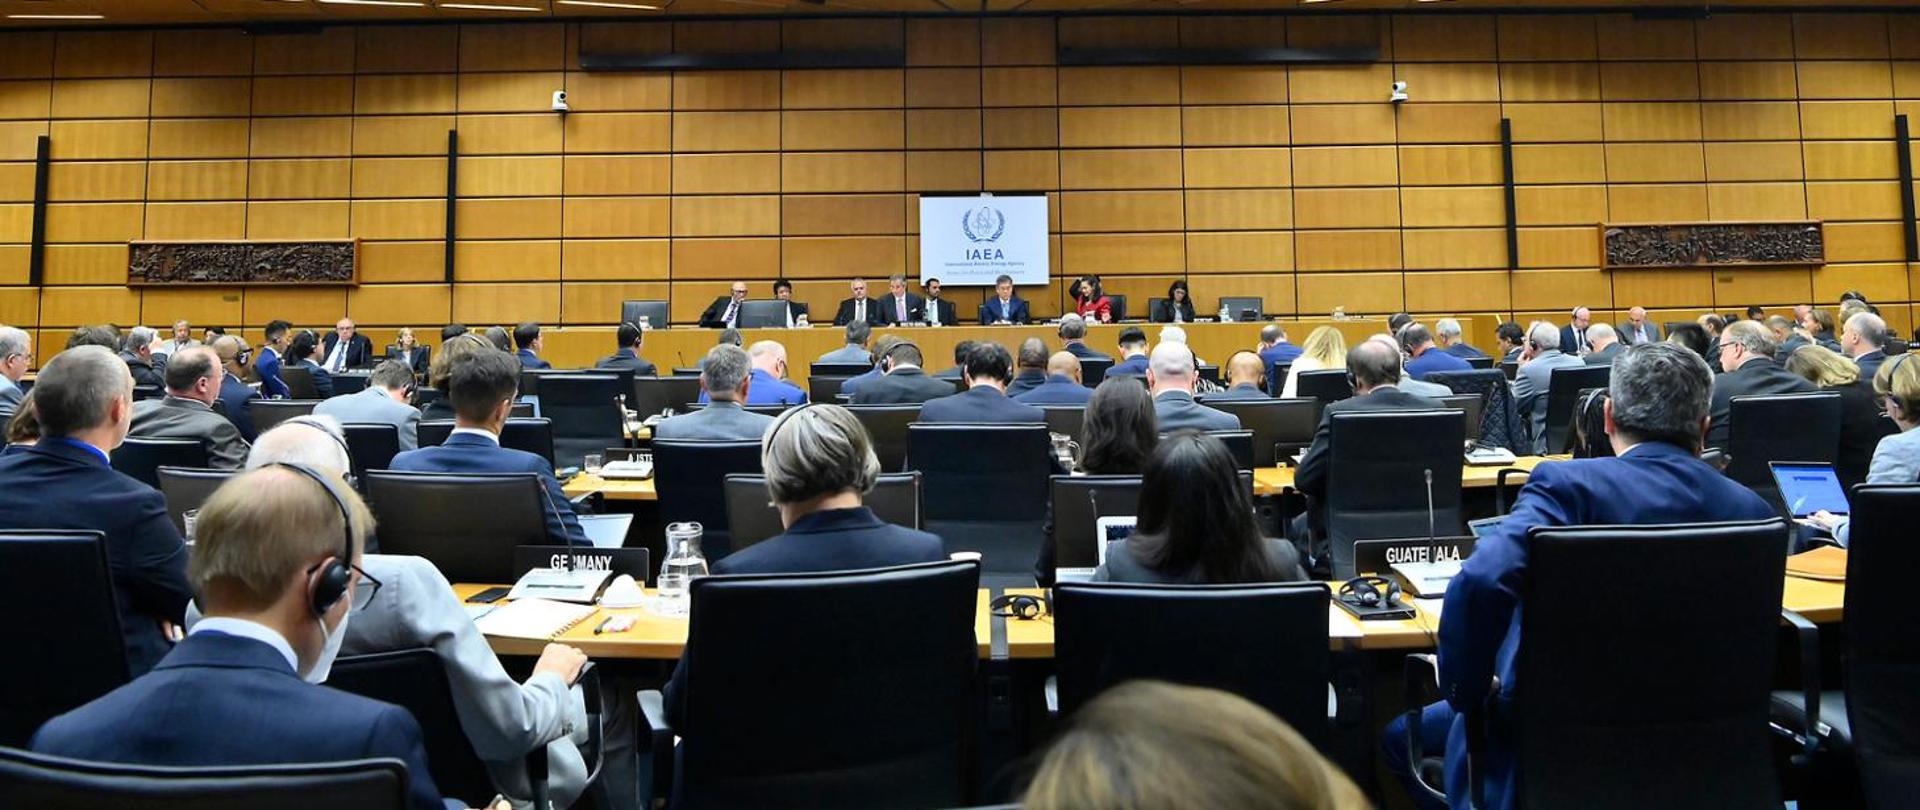 IAEA Board of Governors meeting - participants sit in front of the IAEA leadership